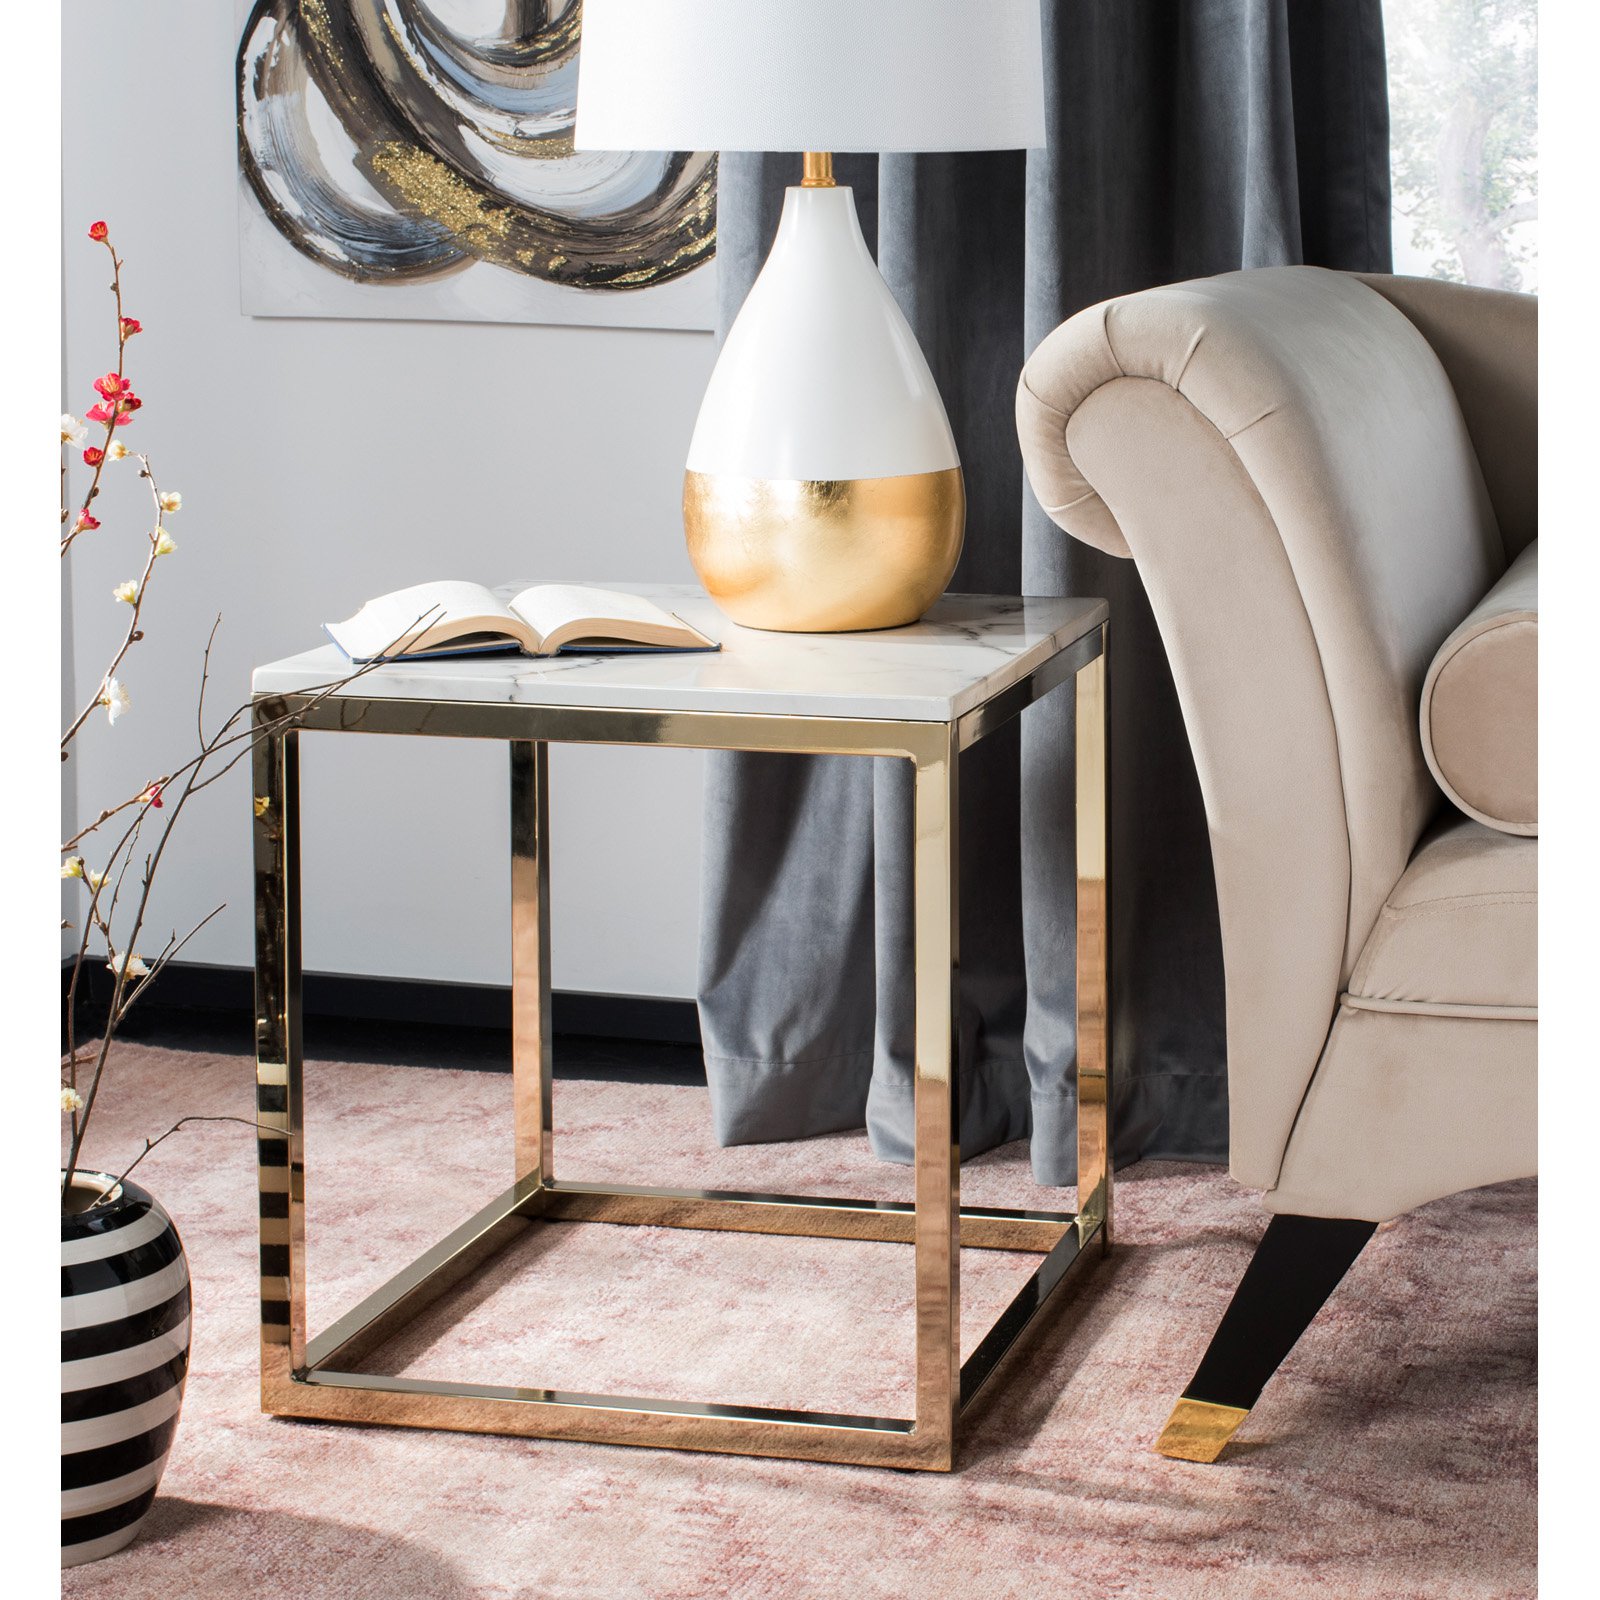 SAFAVIEH Bethany Square Modern Glam End Table, White Marble/Brass - image 2 of 11